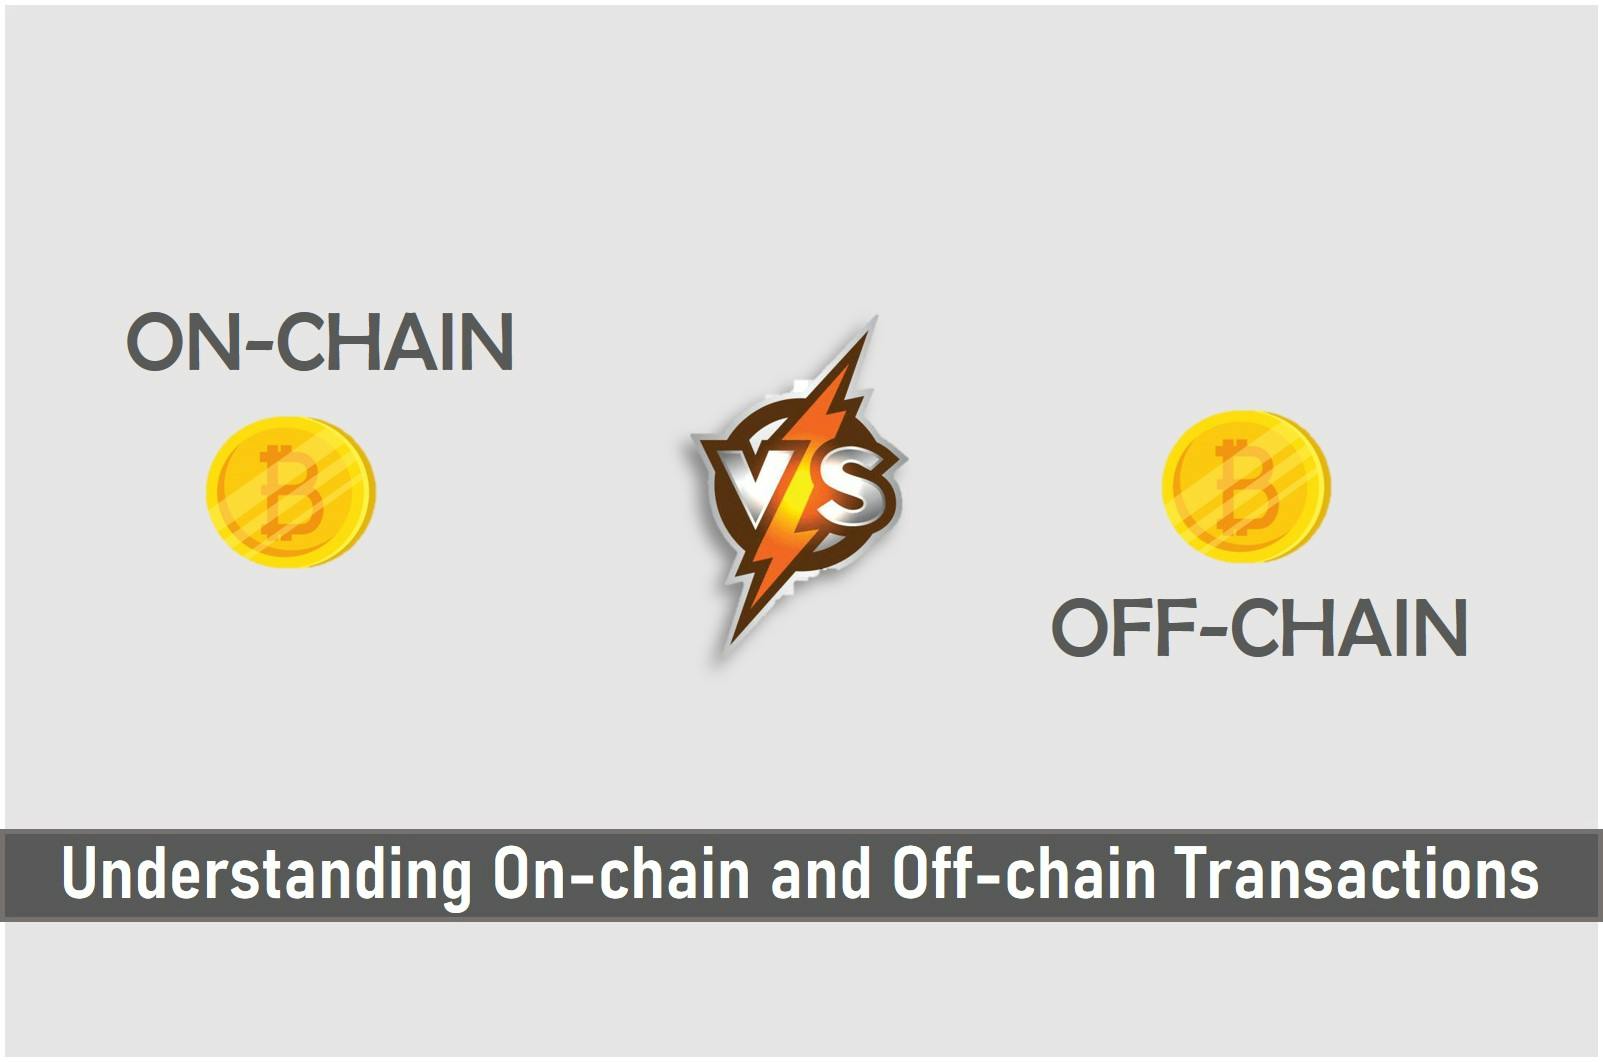 Understanding On-chain and Off-chain Transactions